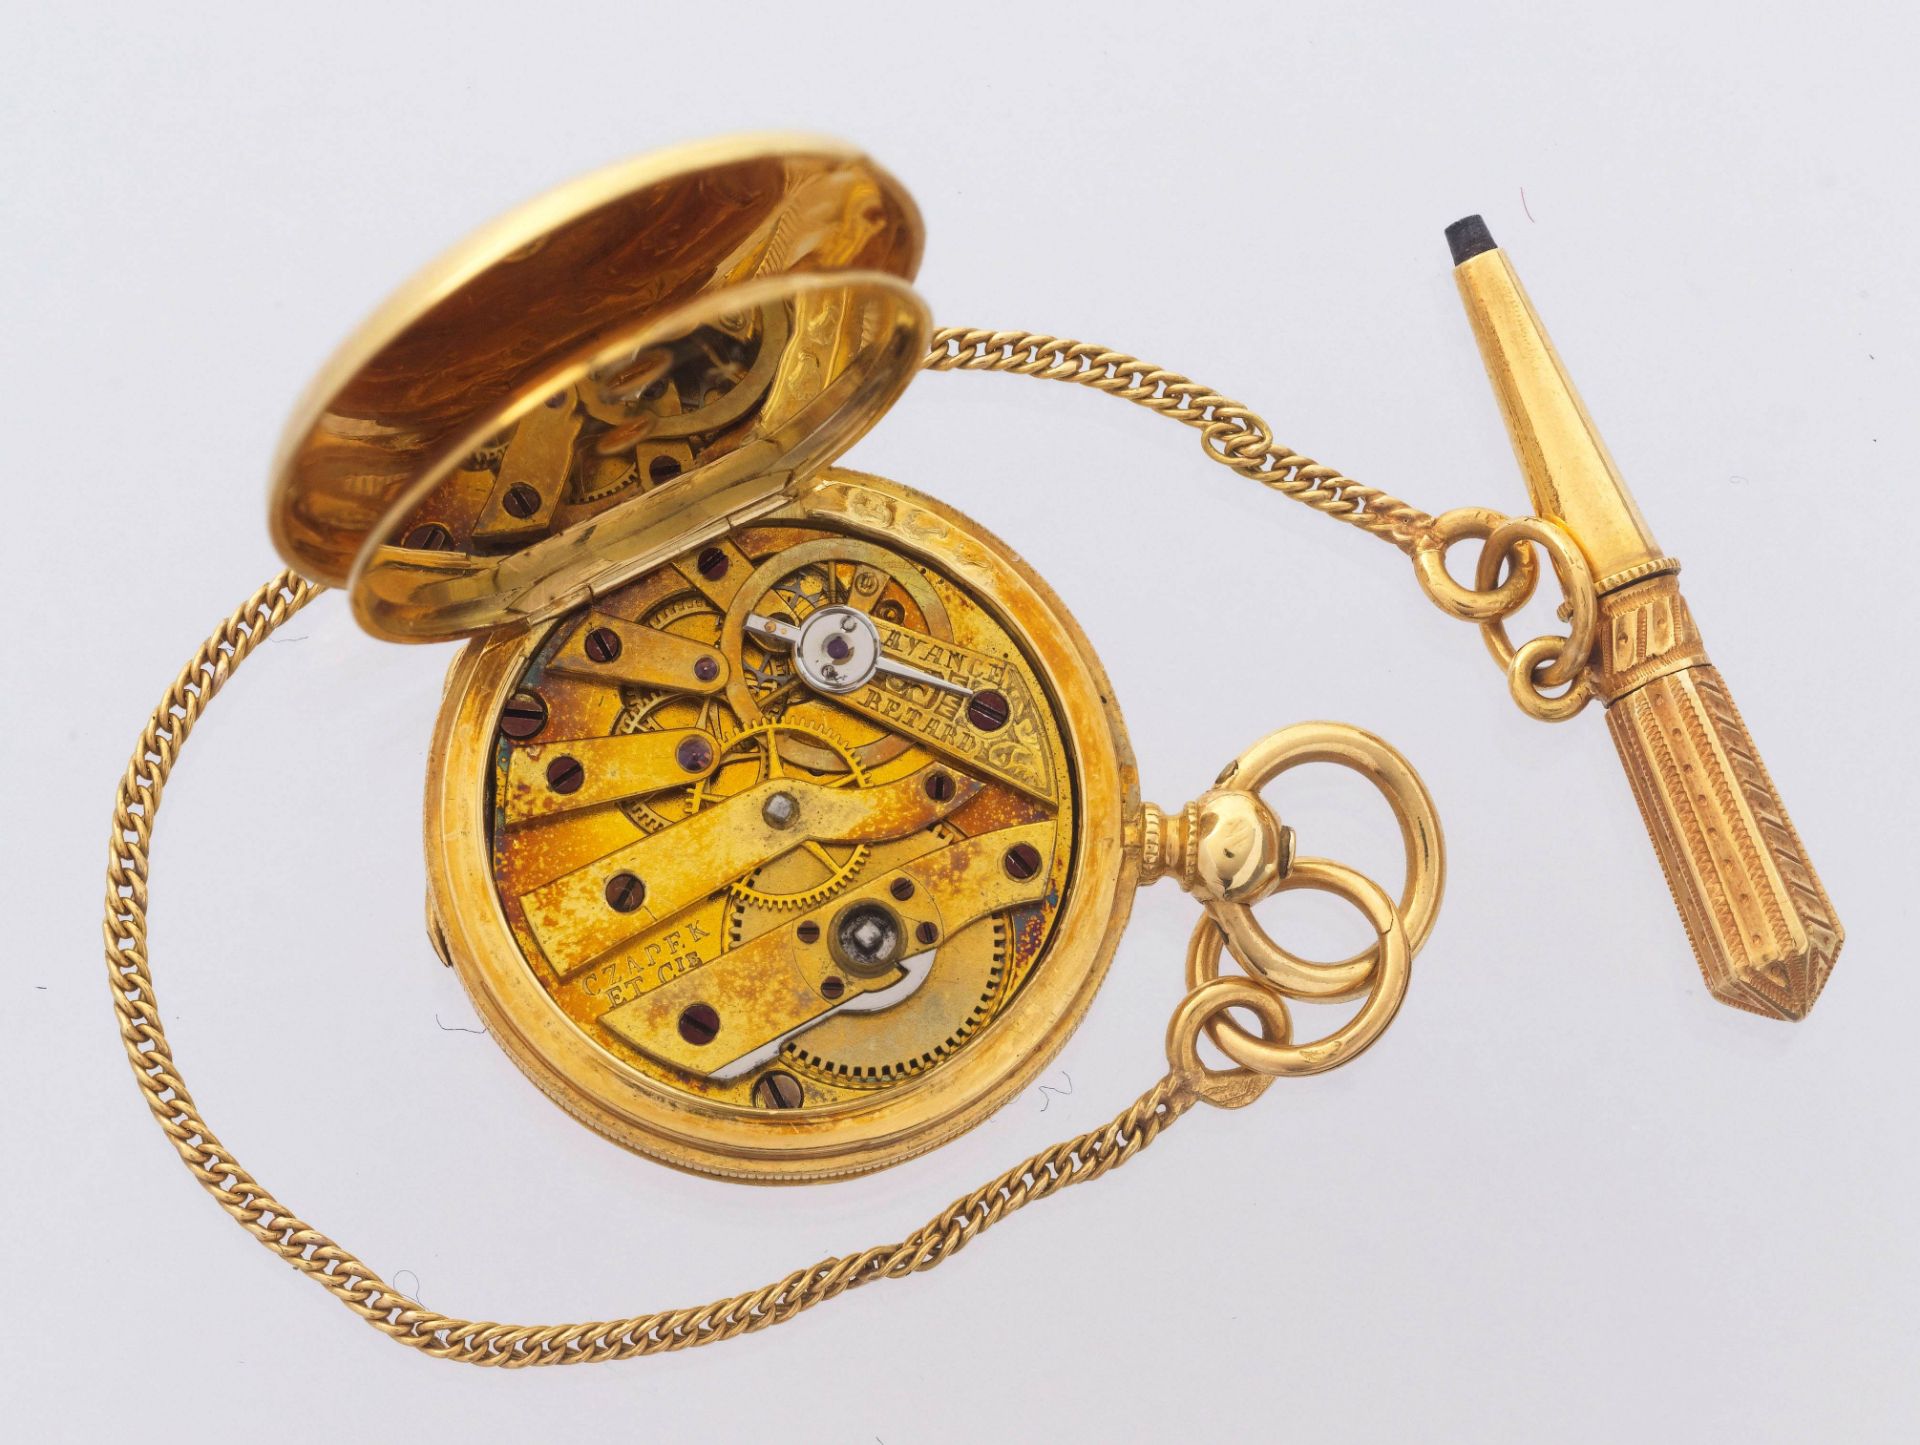 Czapek & Cie, extremely rare miniature pendant watch with the coat of arms of Napoleon III, ca. 1860 - Image 5 of 5